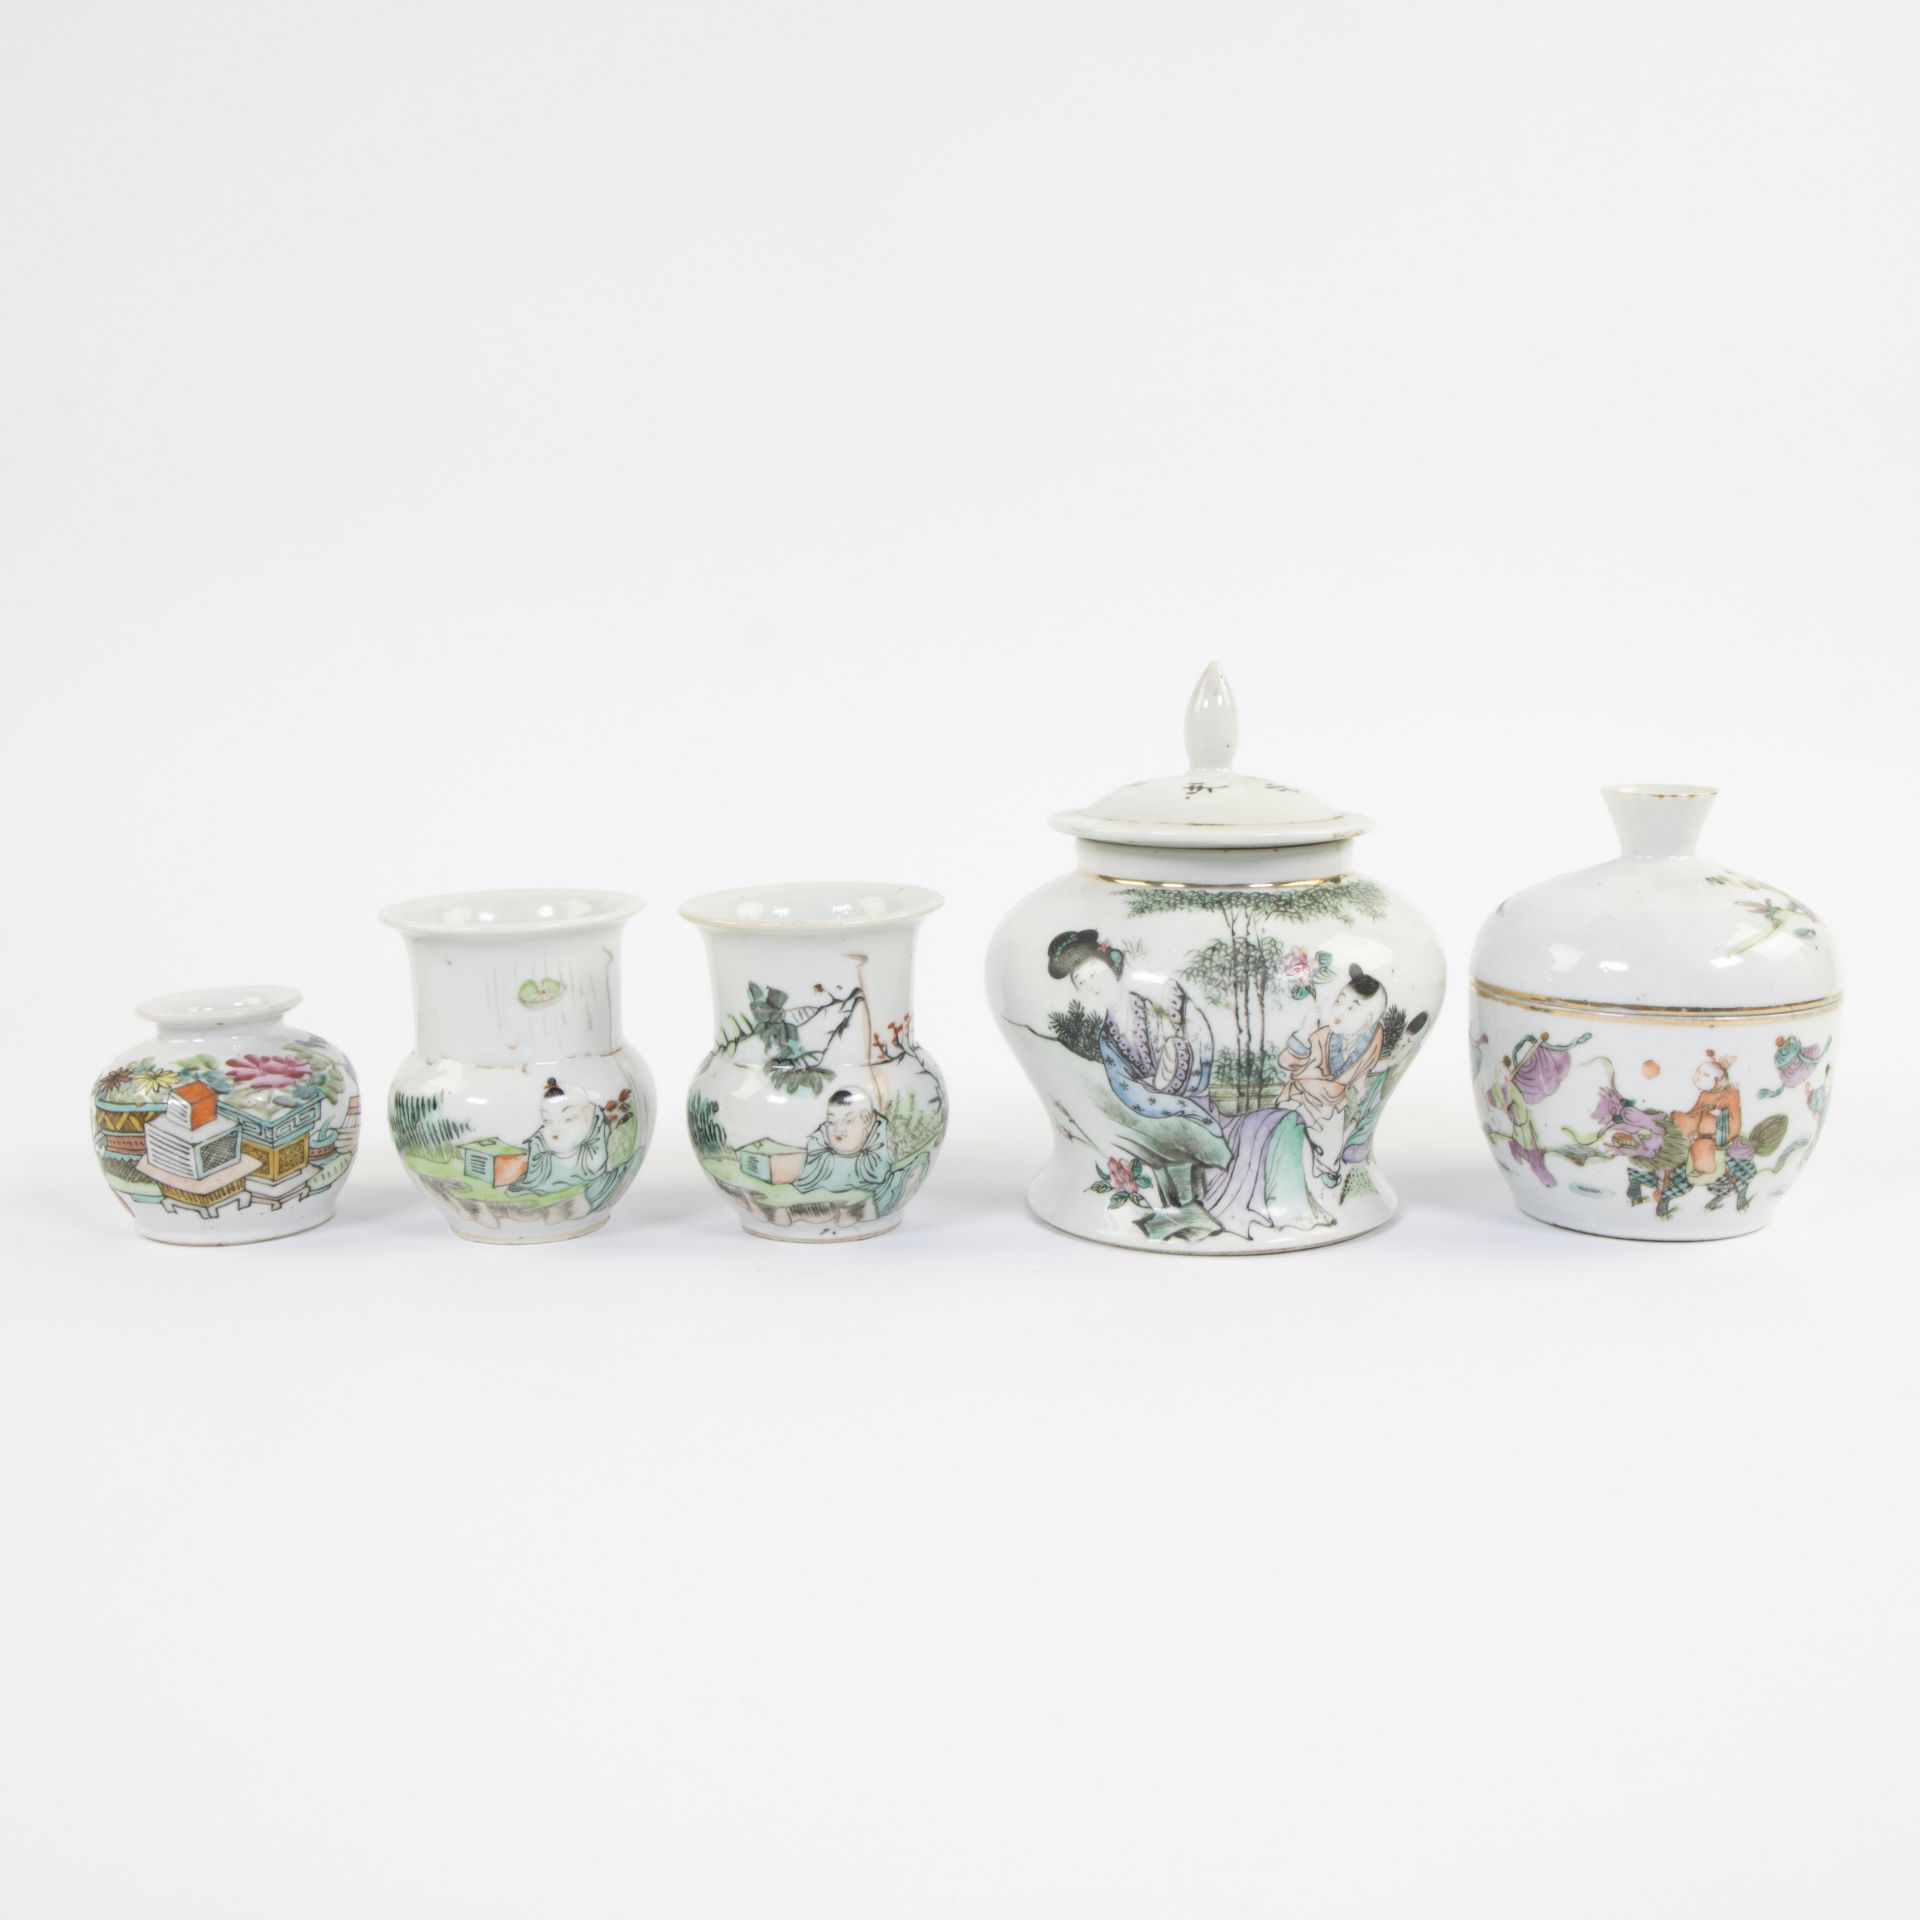 Collection of Chinese porcelain, 3 vases and 2 lidded vases